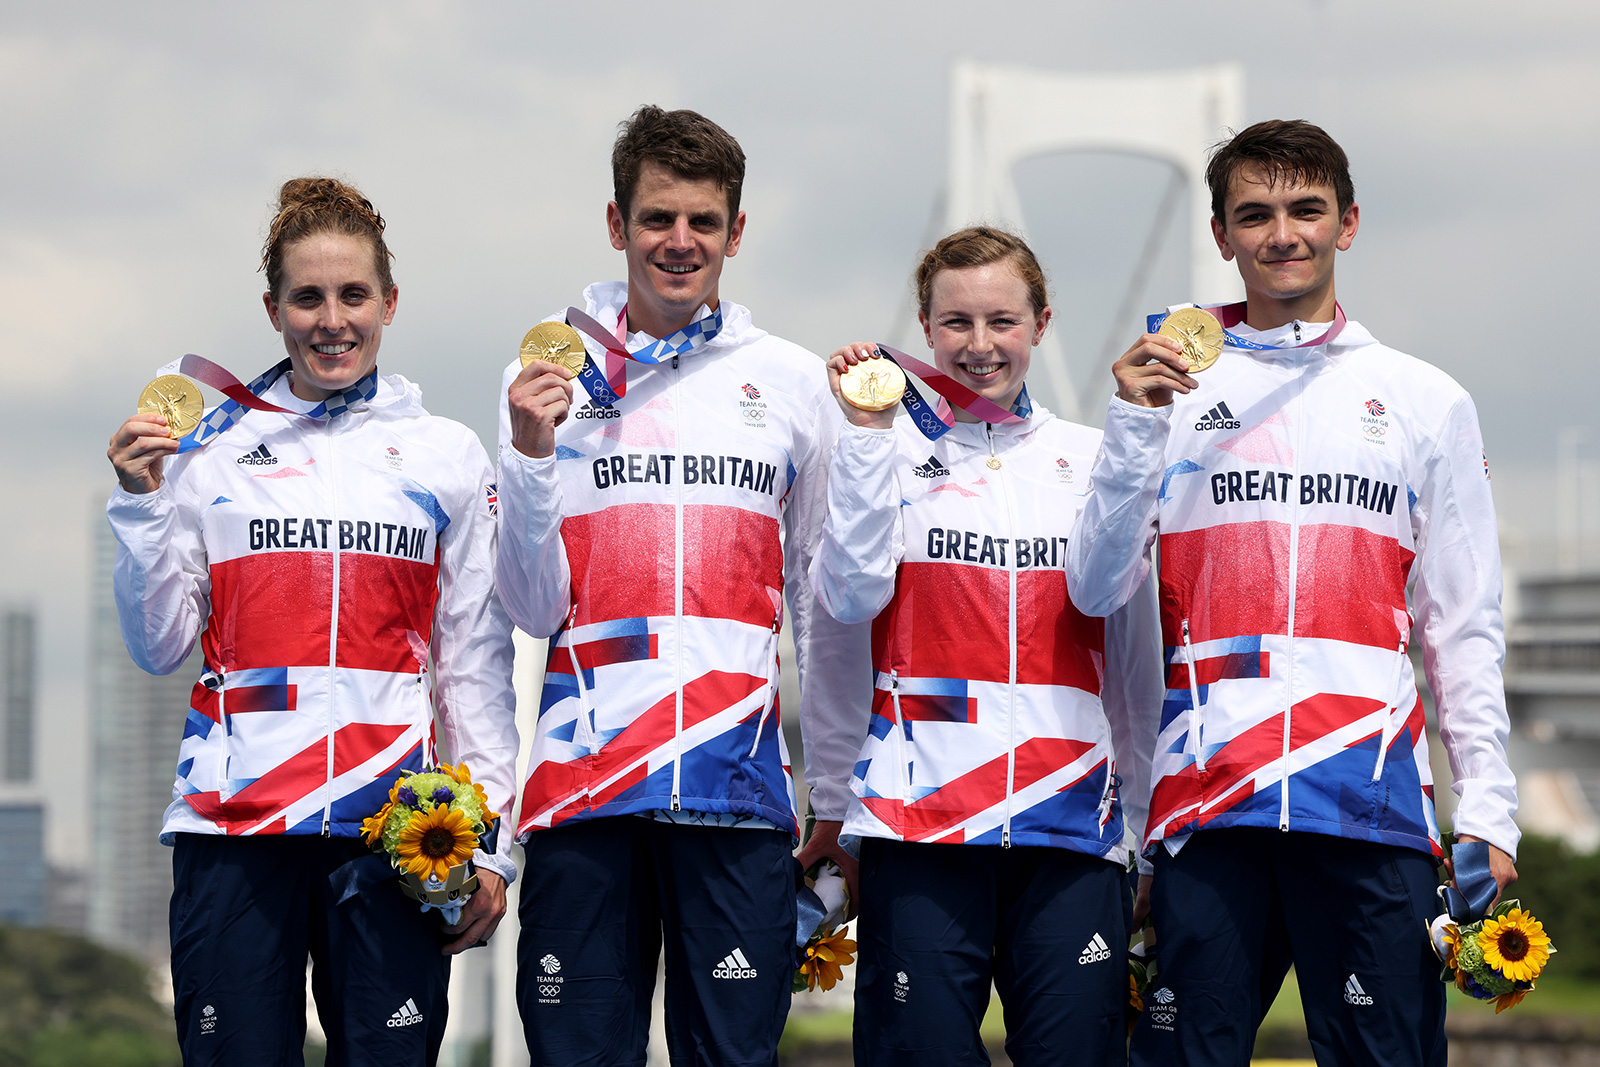 Jessica Learmonth, Jonny Brownlee, Georgia Taylor-Brown and Alex Yee of Britain pose with their gold medals following the mixed relay triathlon on Saturday, July 31.